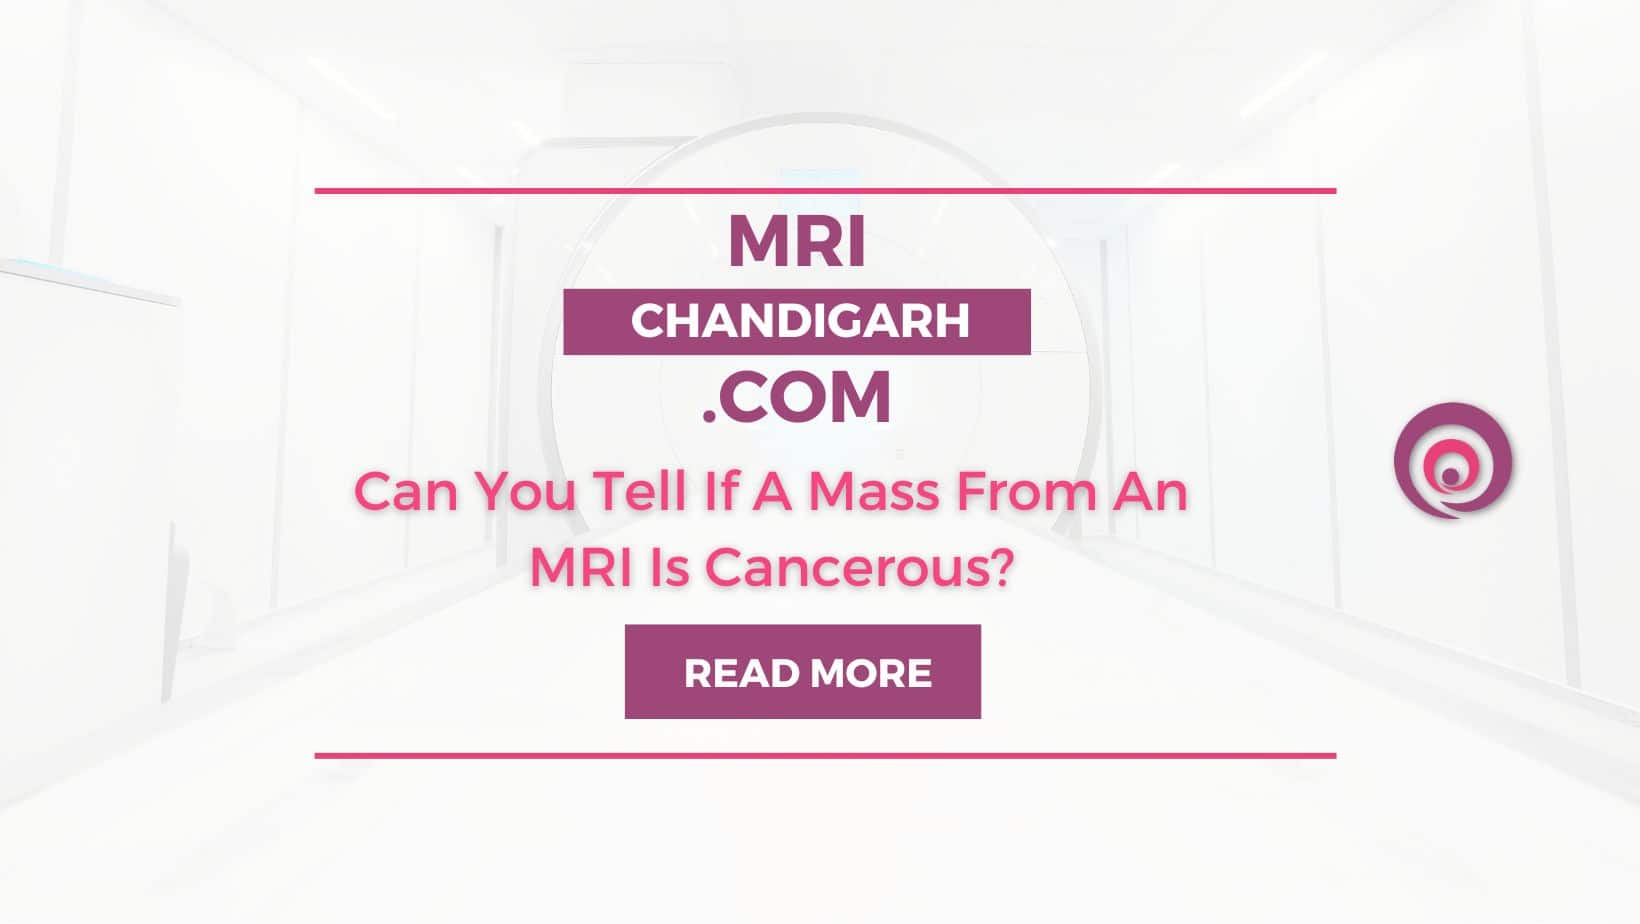 Can You Tell If A Mass From An MRI Is Cancerous?